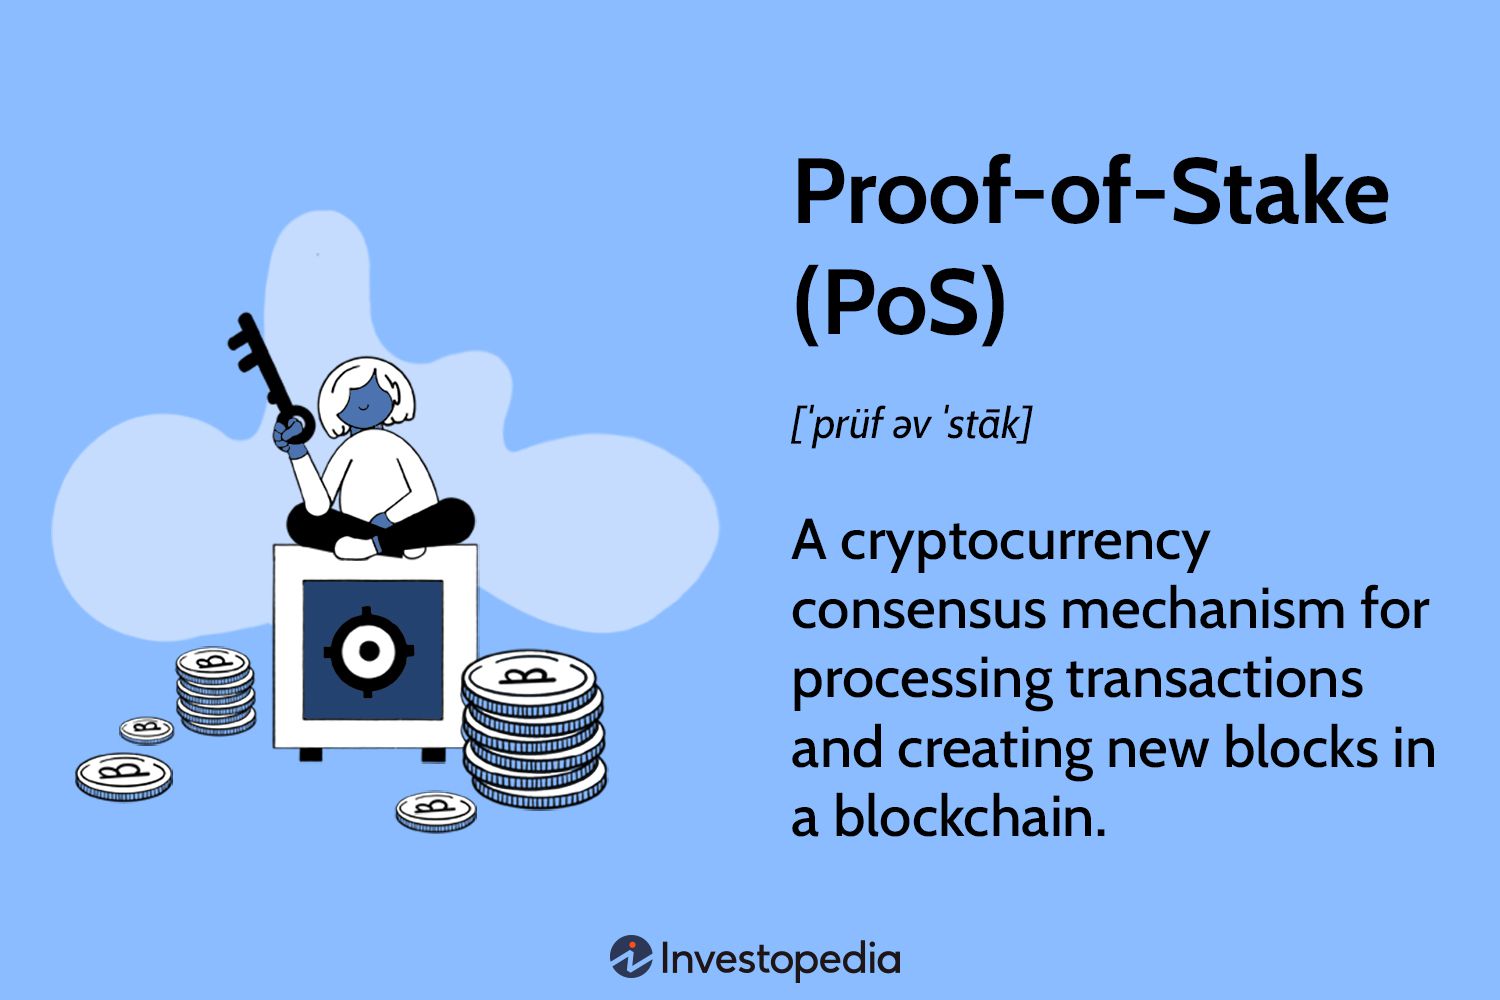 What Is Proof-of-Stake? - CoinDesk